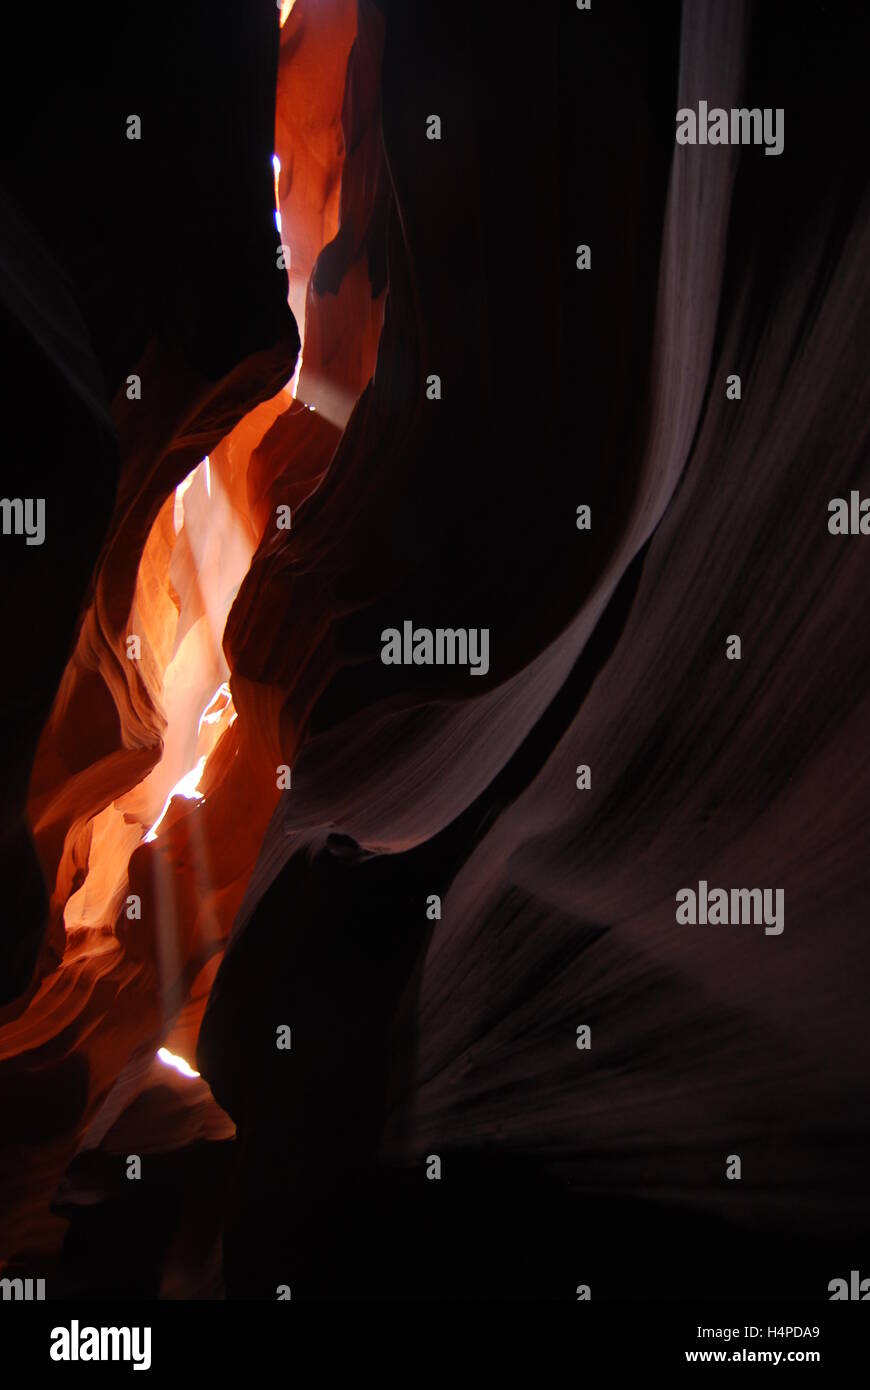 Light effects in the Antelope slot canyon Stock Photo